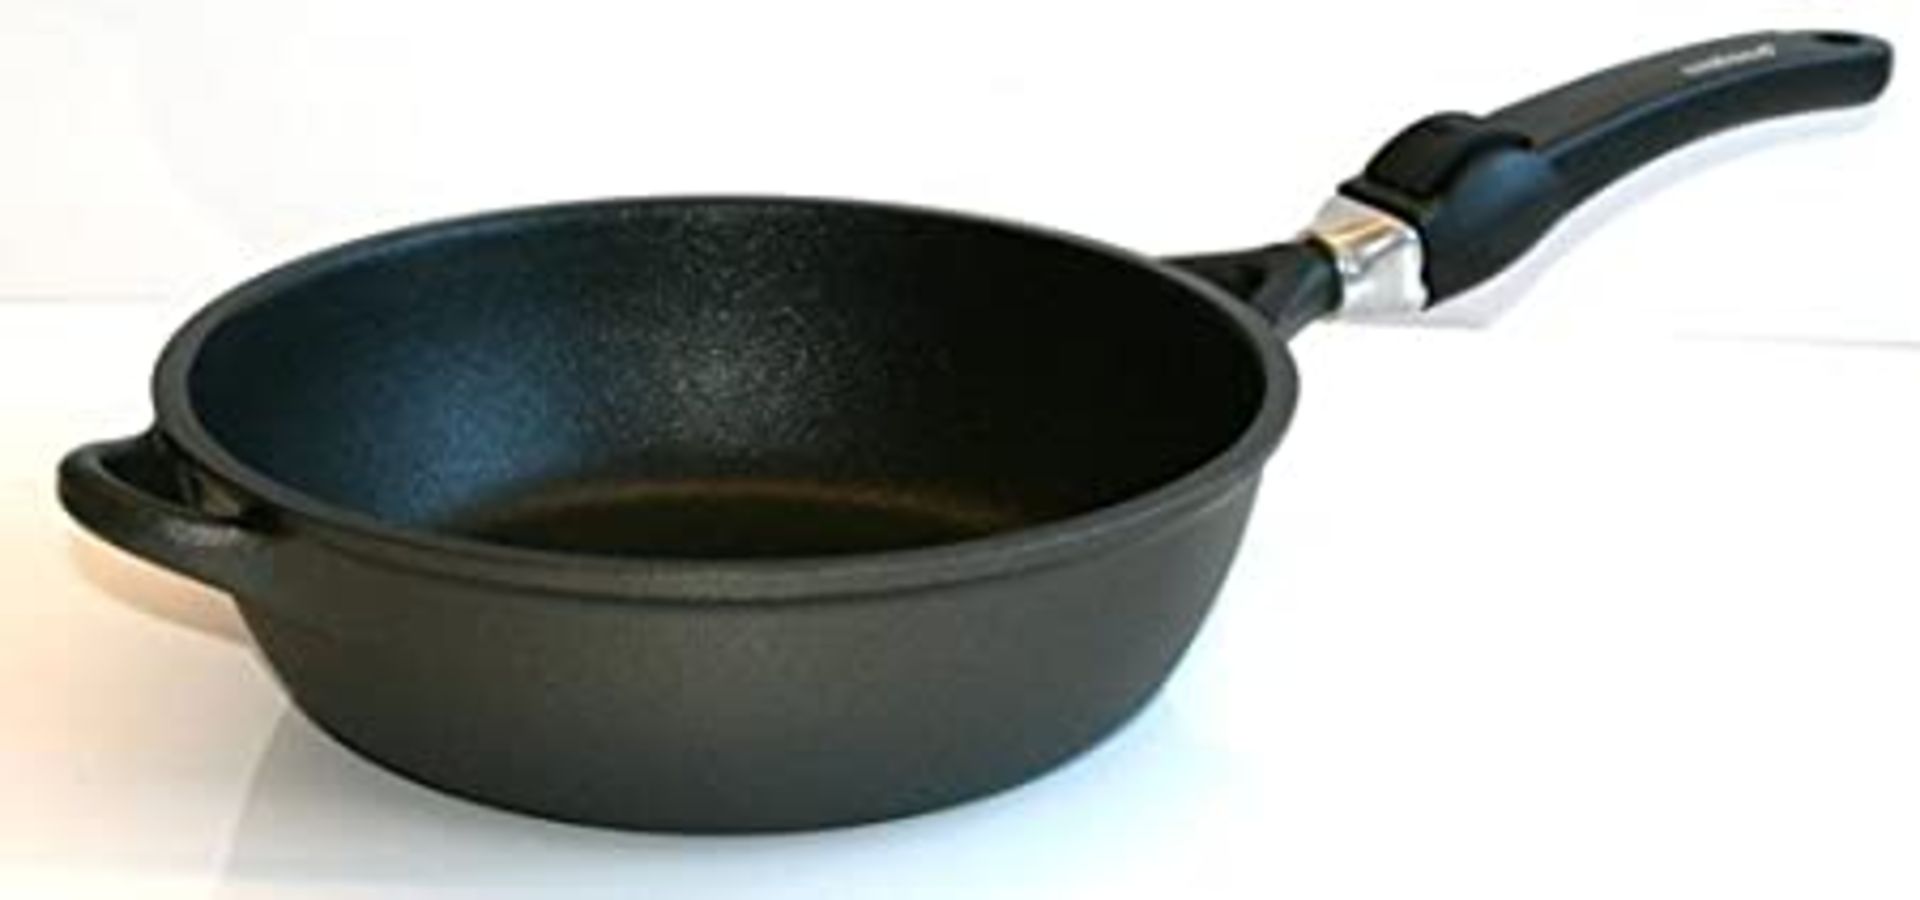 Crafond 32cm Saute Pan with detachable handle and lid - Image 3 of 4